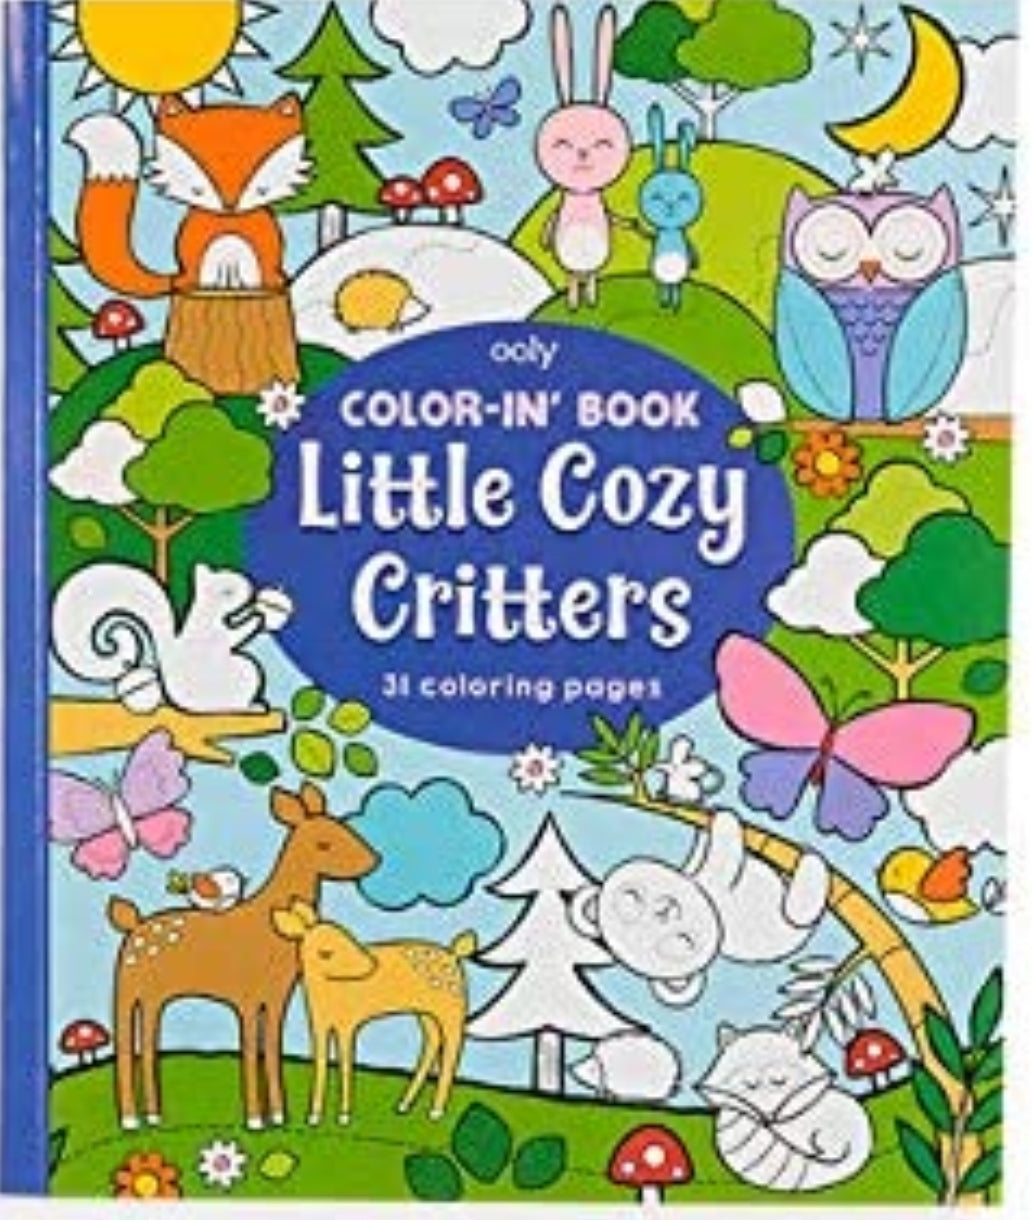 Color-in' Book Little Cozy Critters